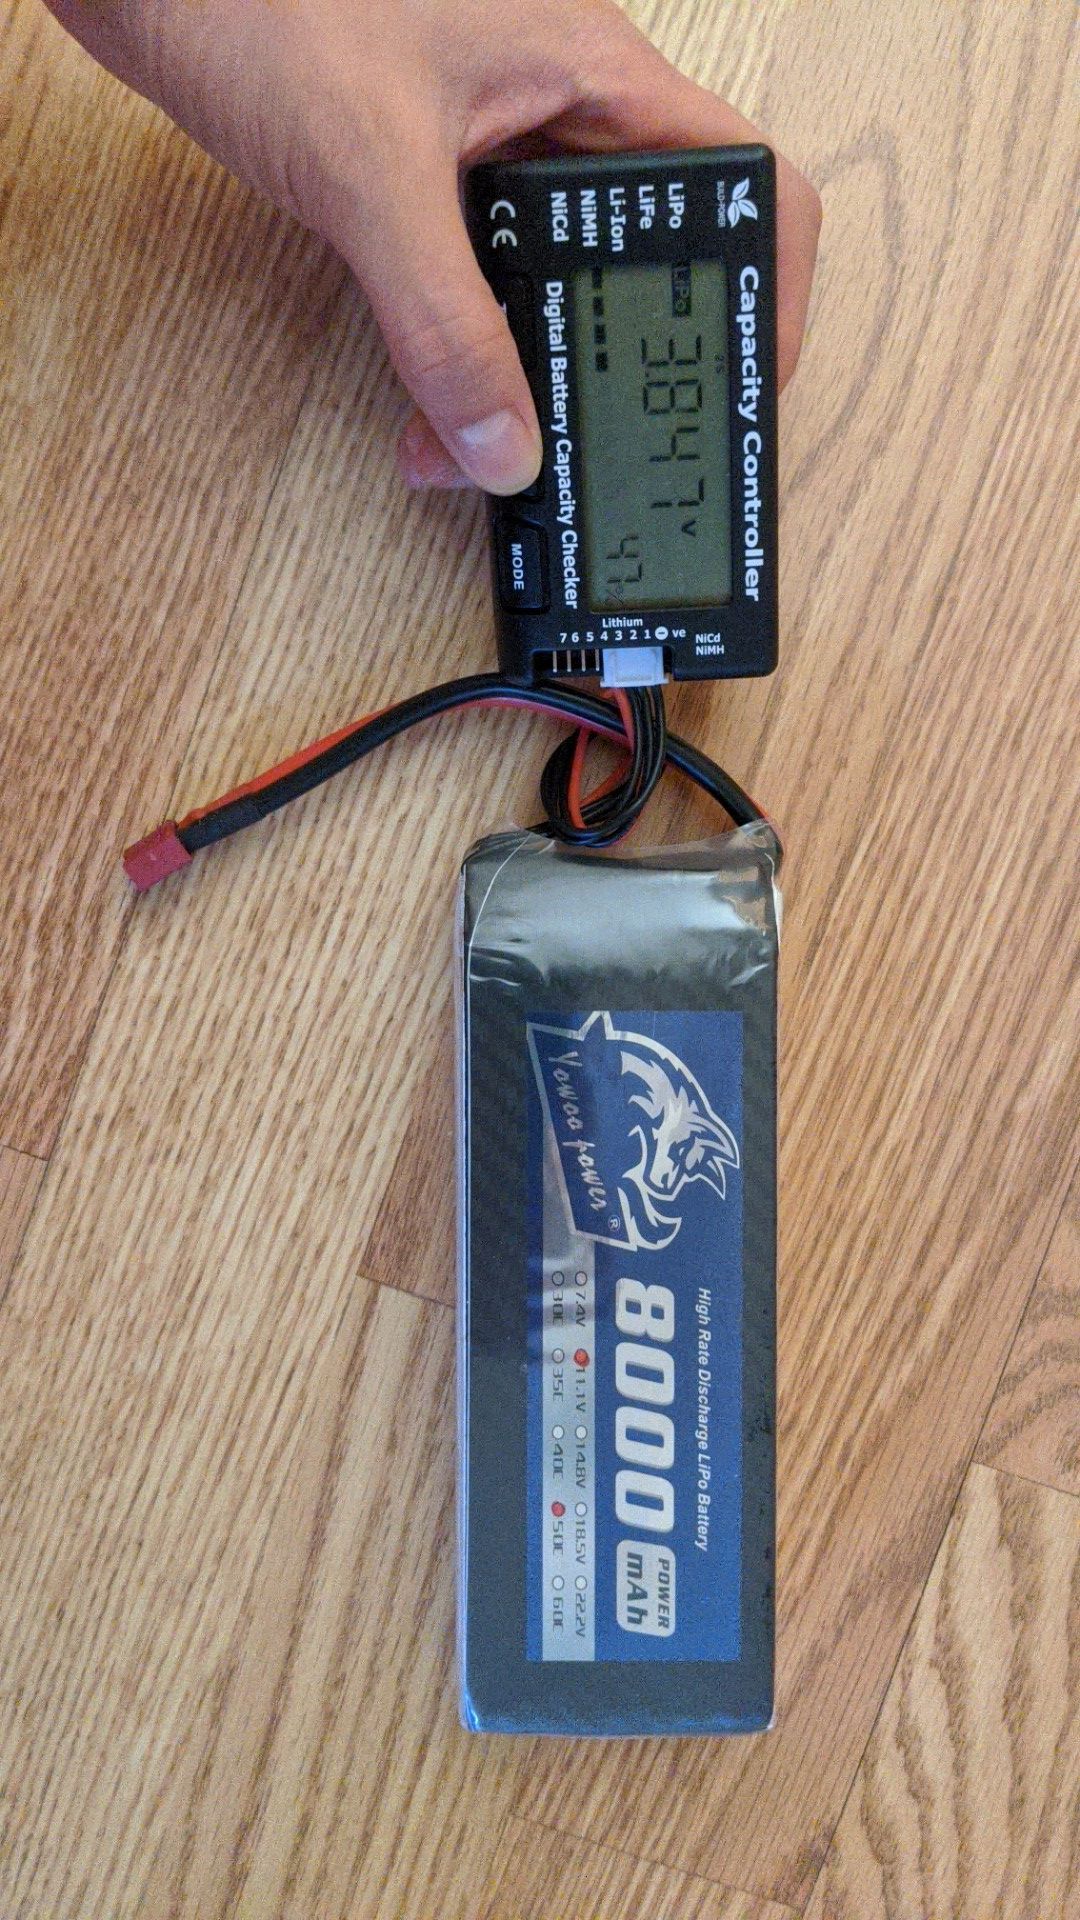 Brand new 11.1v 3s 8000mah 50c RC lipo battery with deans plug